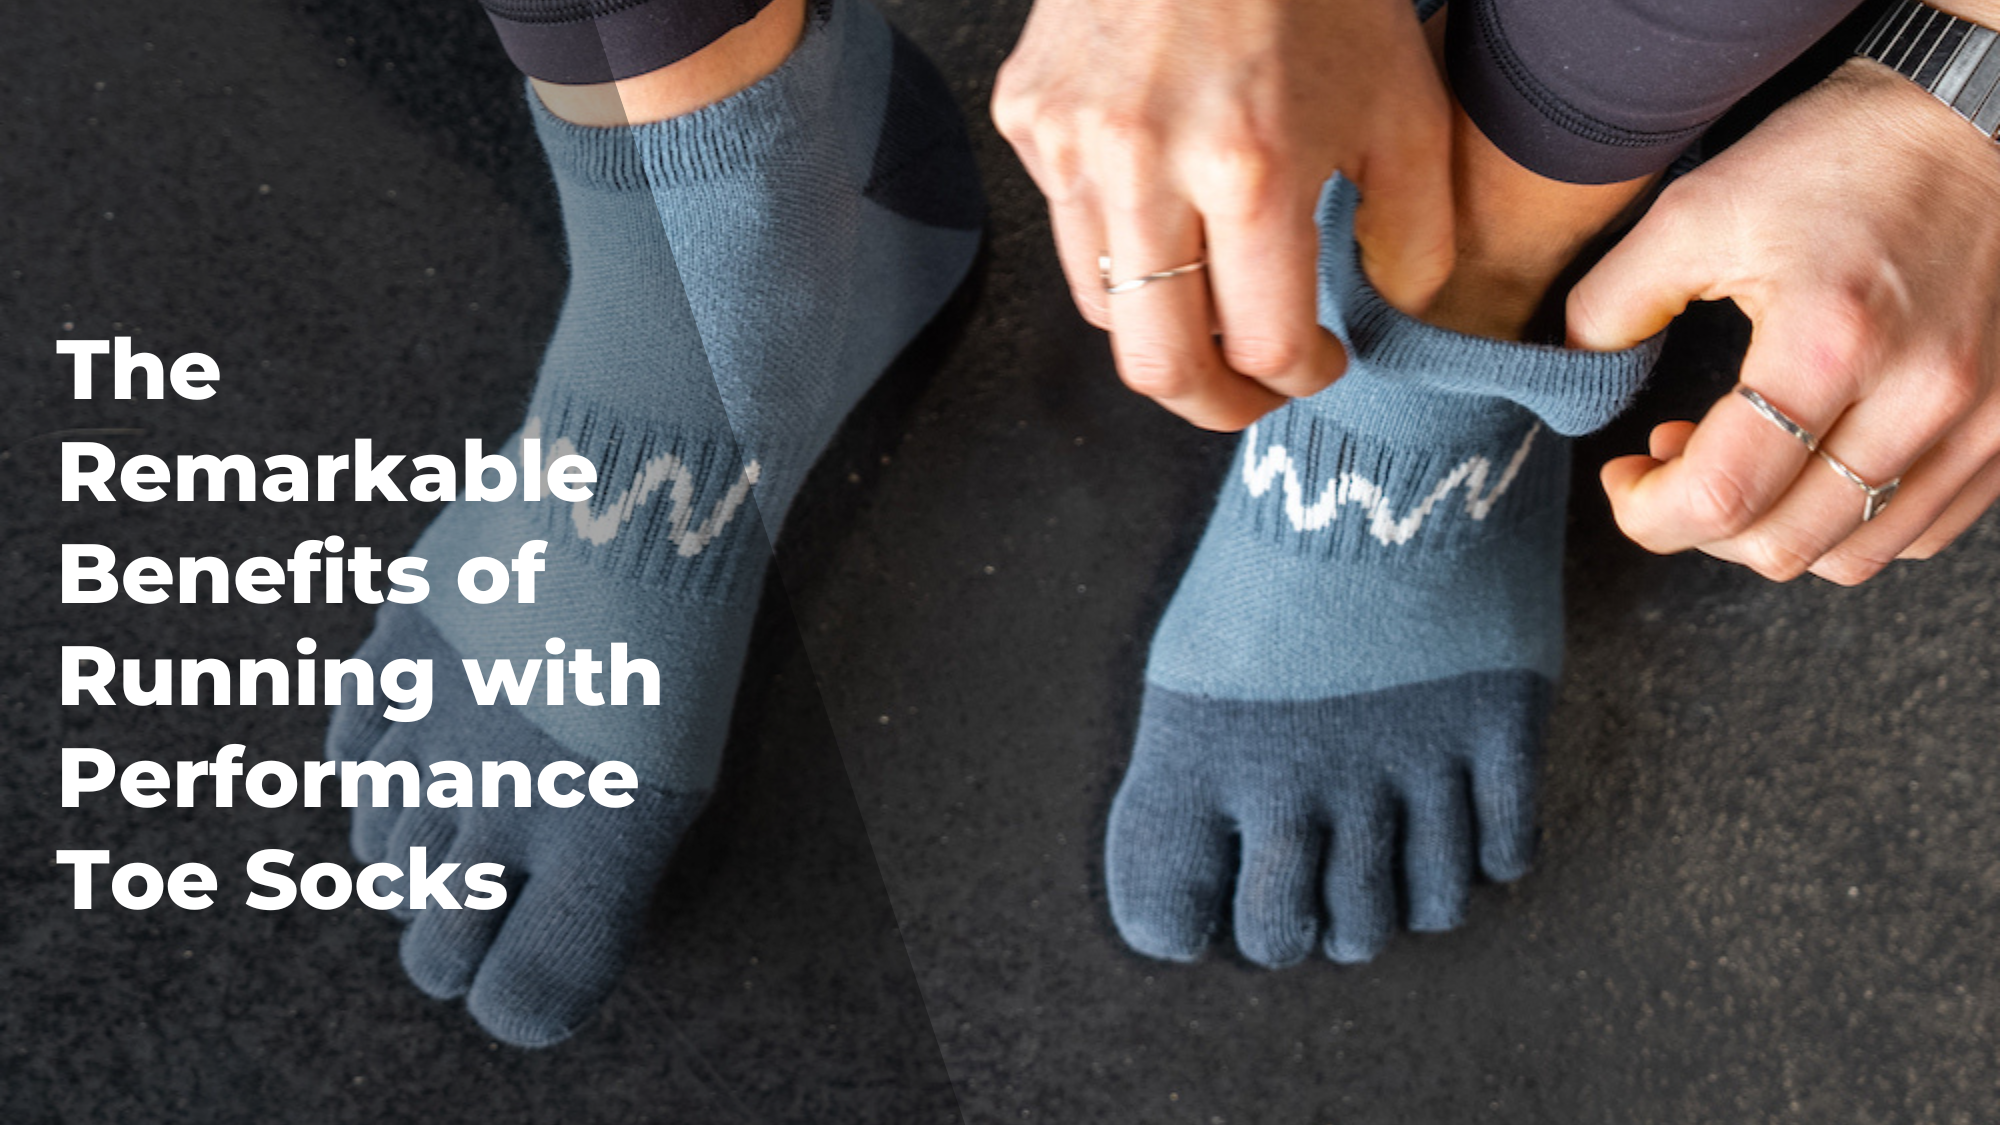 The Remarkable Benefits of Running with Performance Toe Socks